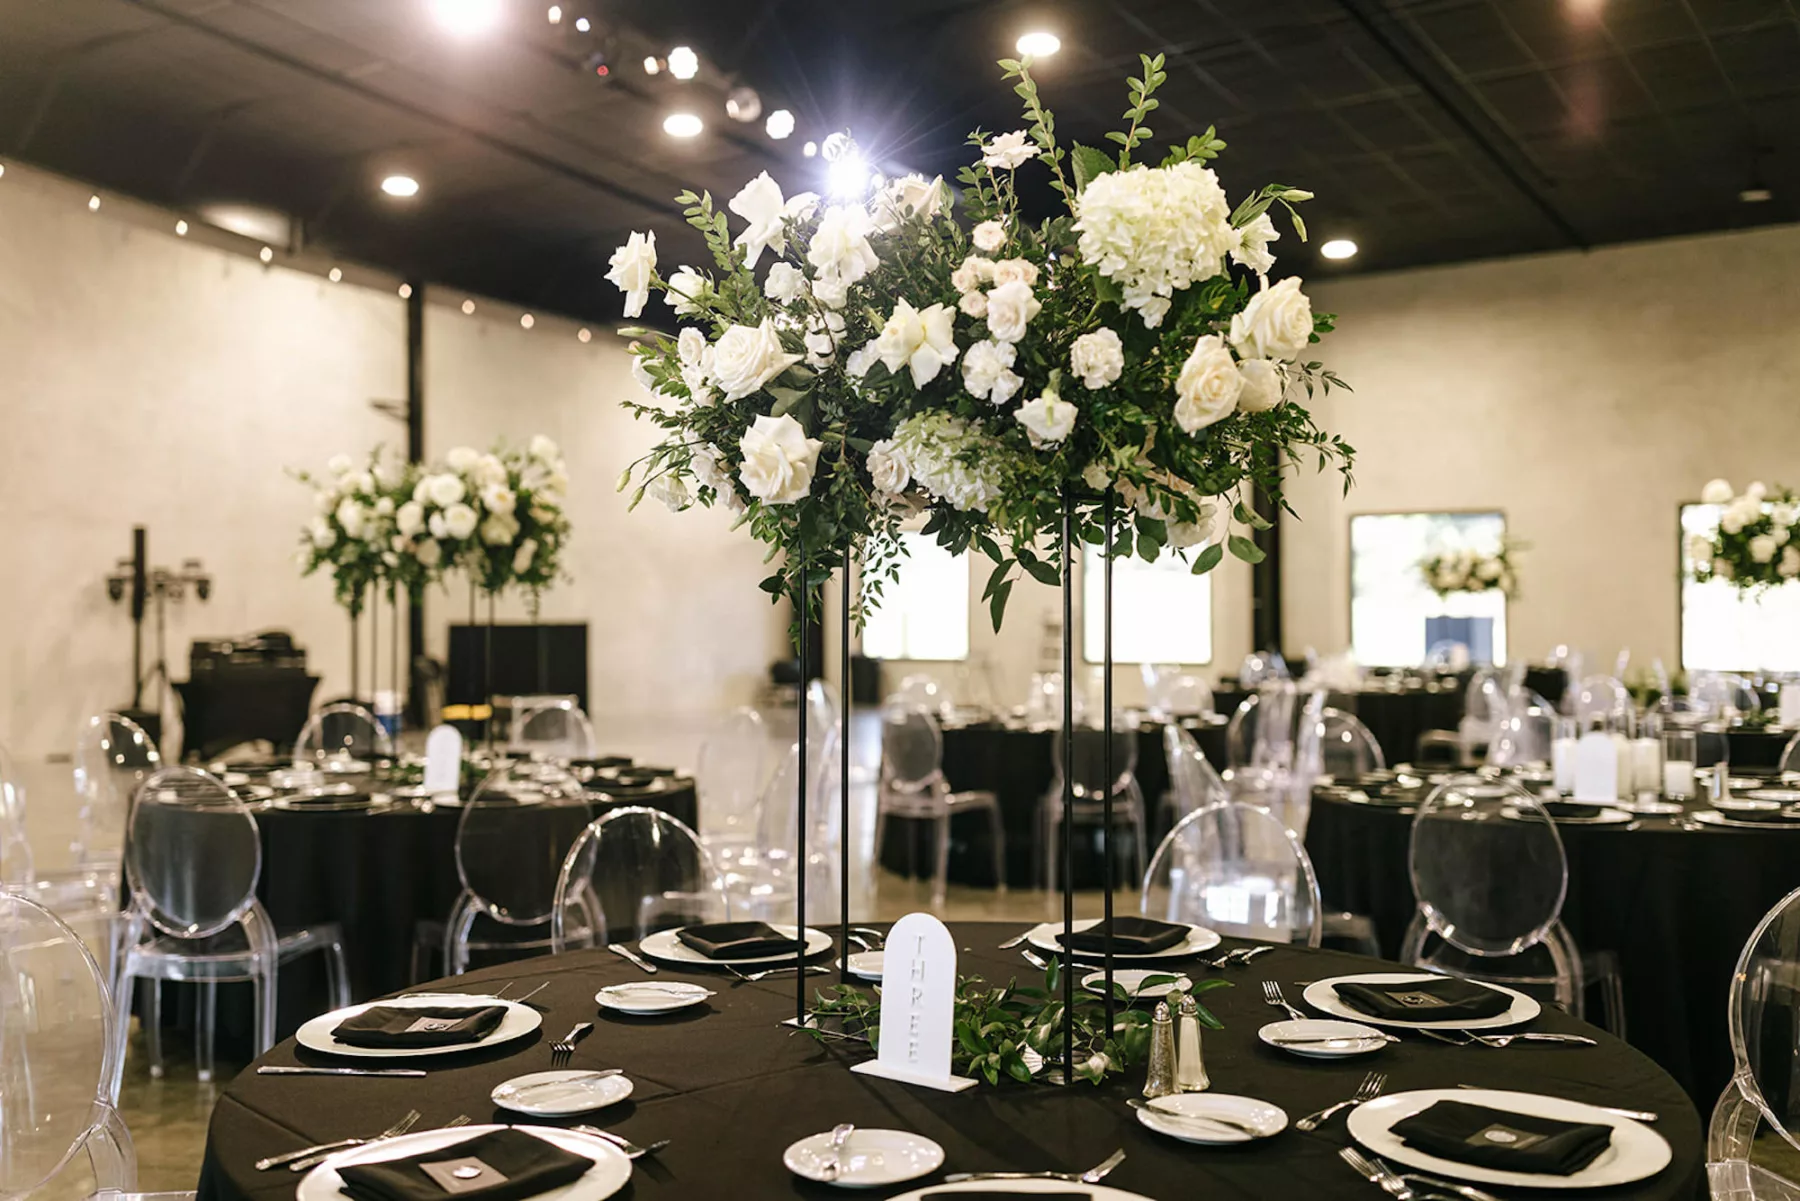 Tall Black Flower Stand with White Roses, Hydrangeas, and Greenery Centerpiece Decor Ideas | Moody Modern Wedding Reception Tablescape Inspiration | Tampa Bay Florist Bloom Shakalaka | Caterer Amici's Catering